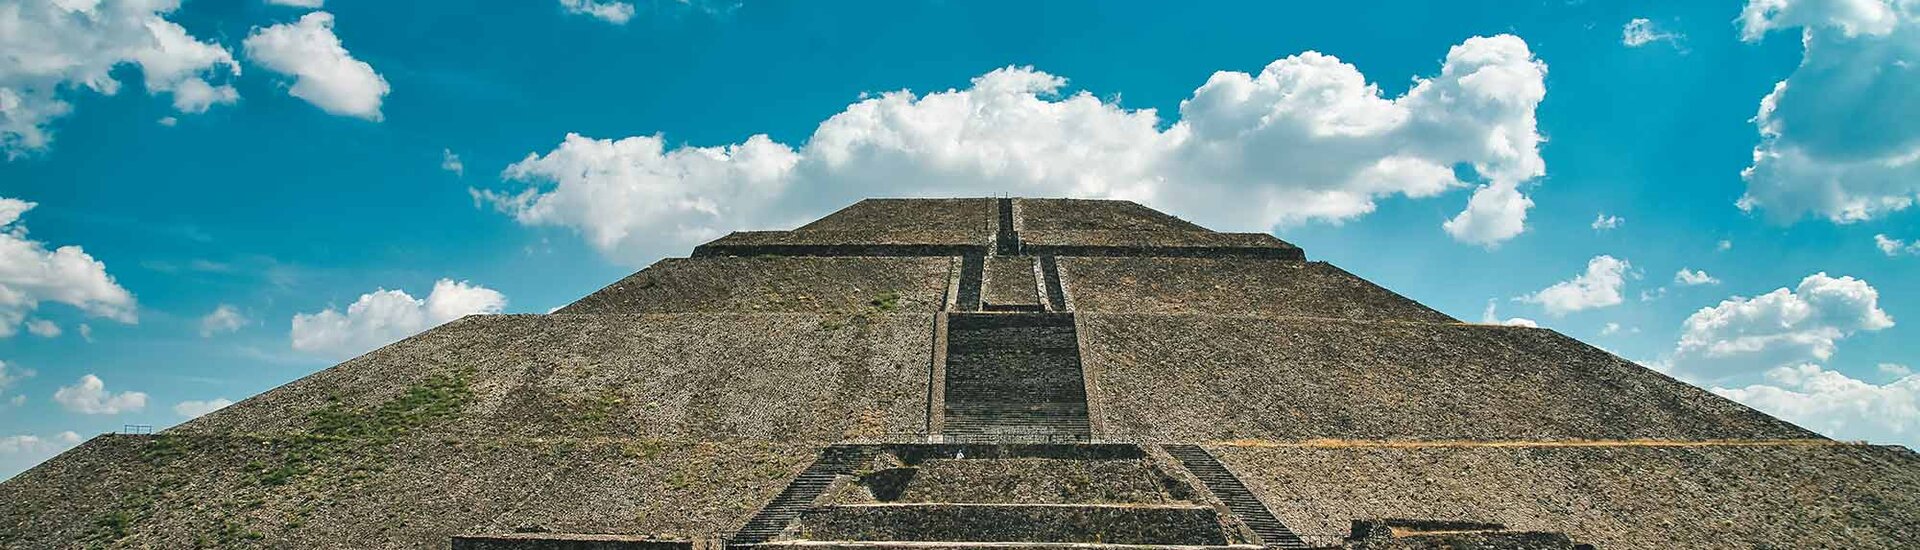 Pyramide des Mondes in Teotihuacan